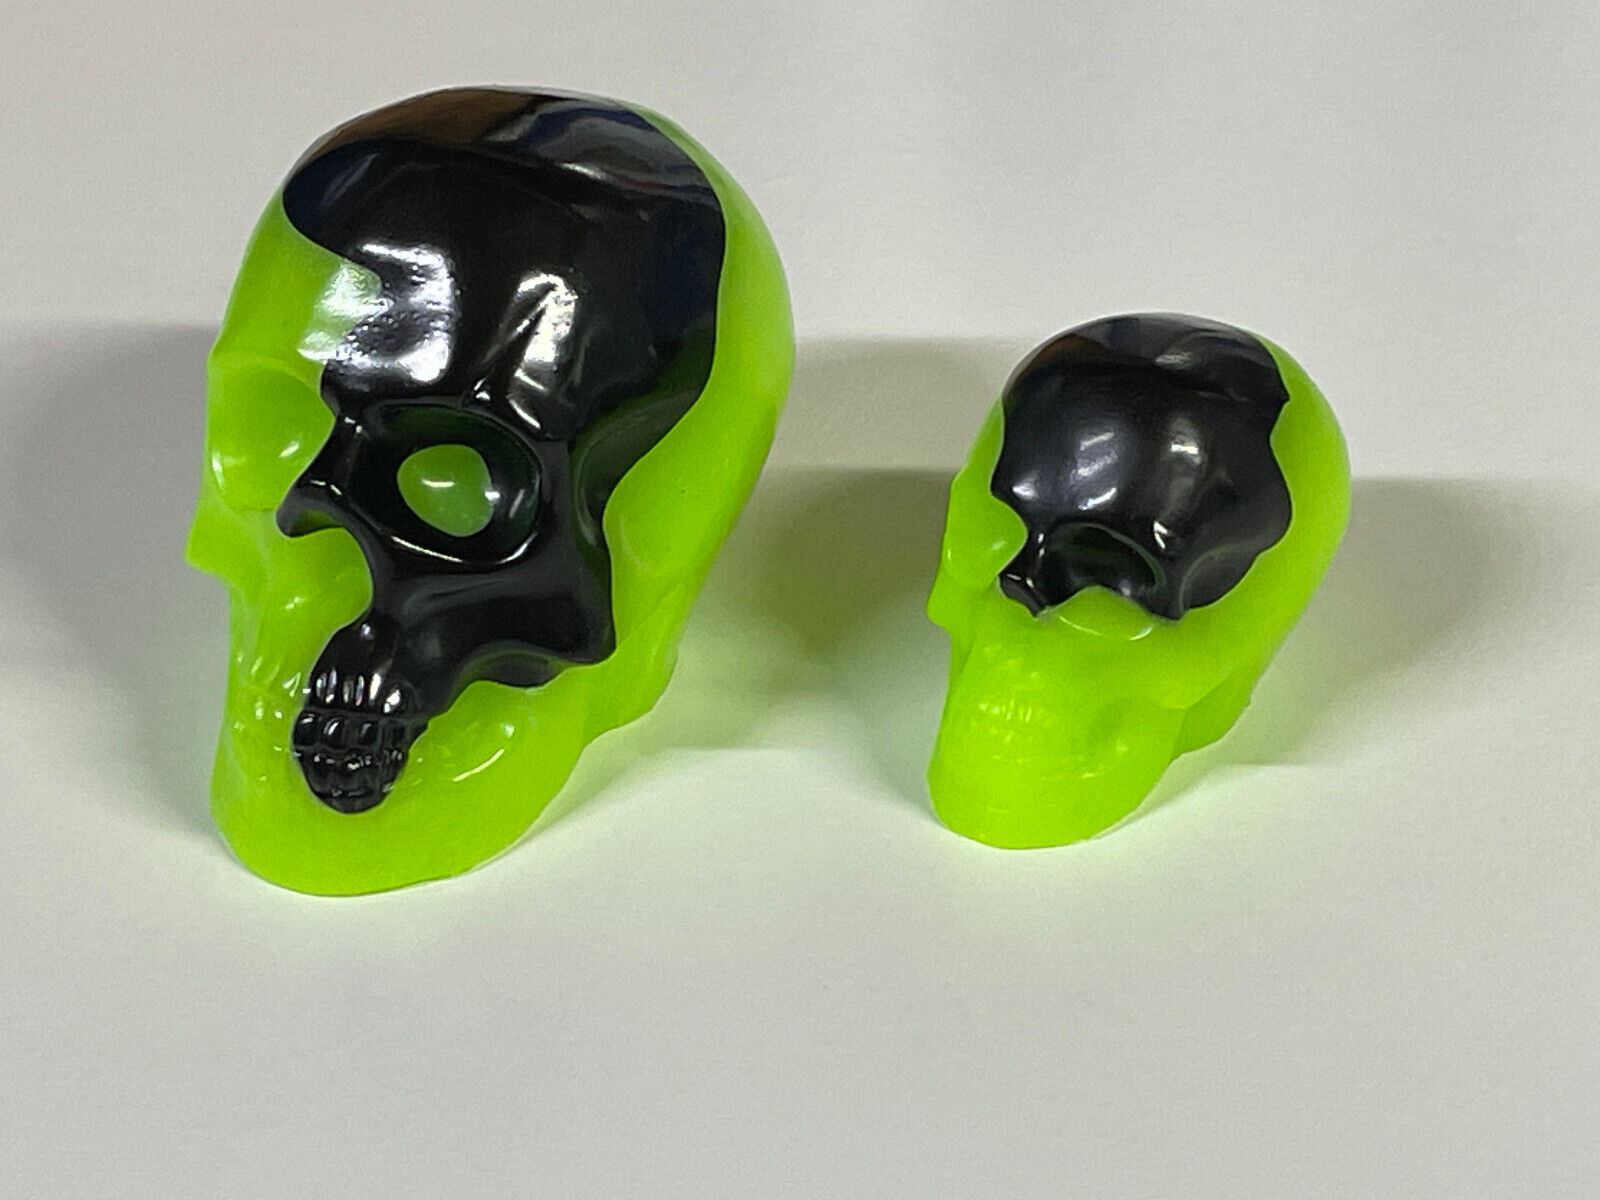 Matched pair of Green Glow in the Dark Resin Skulls.  Unique and hand made